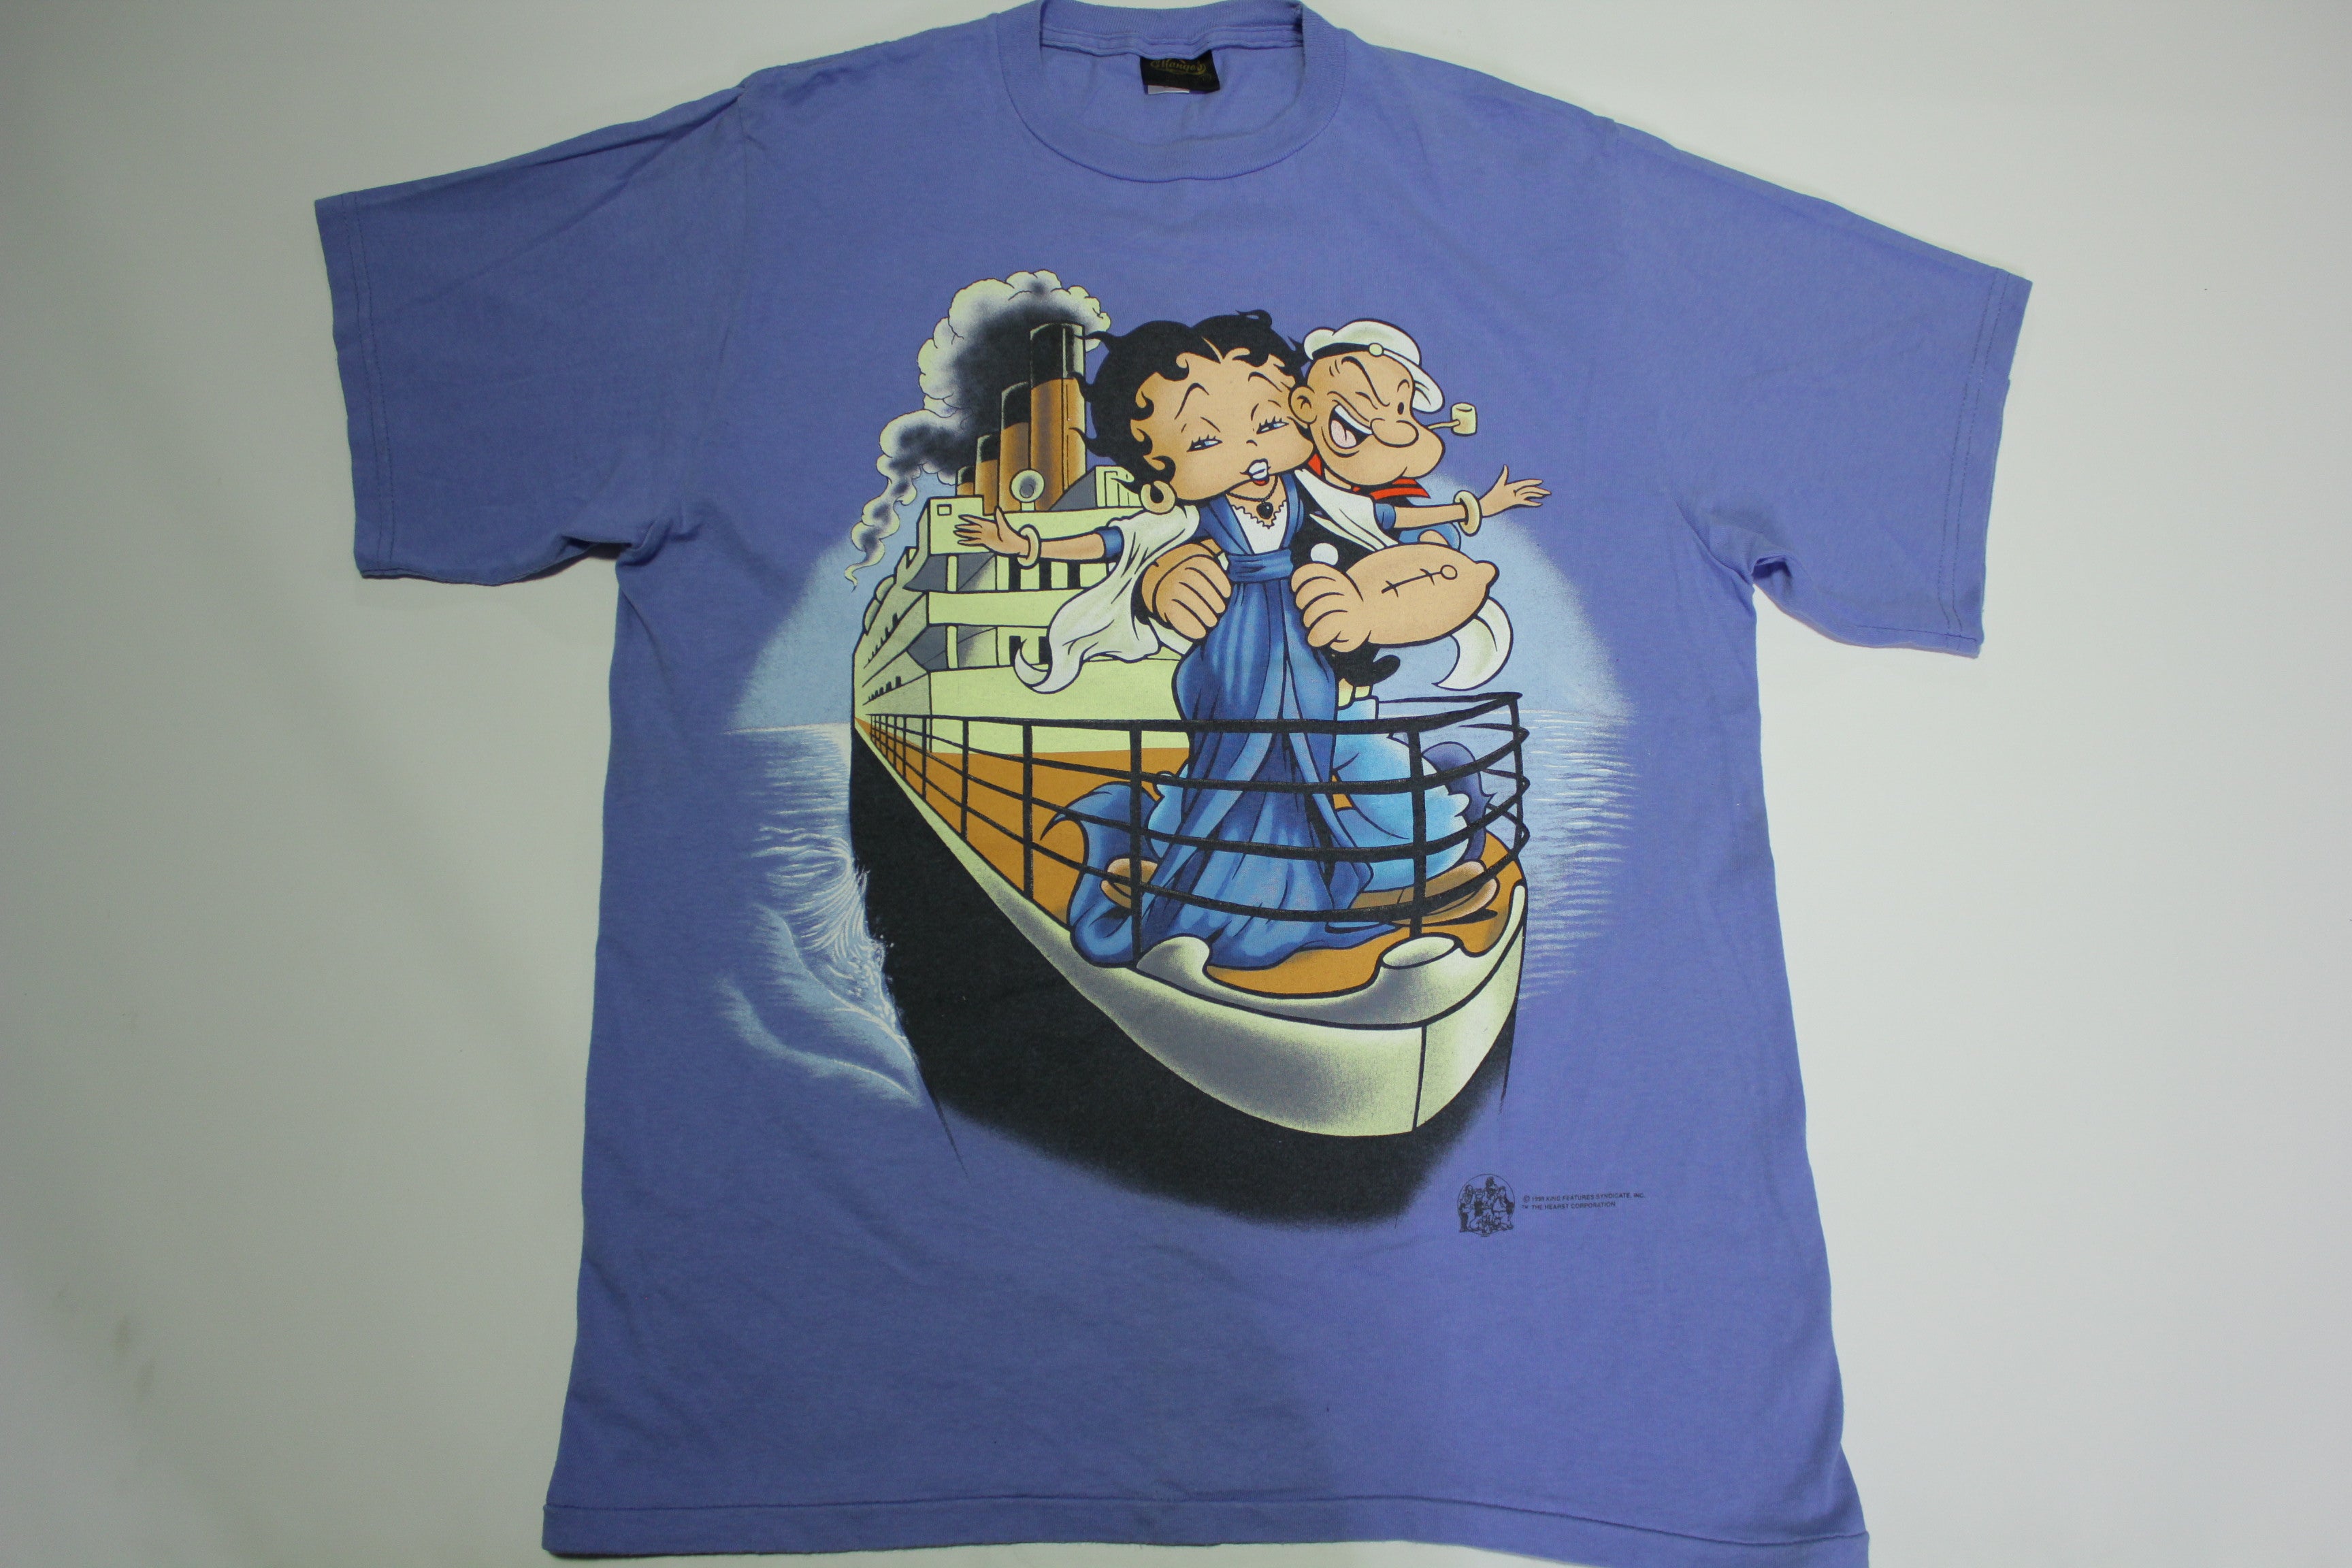 Betty Boop Popeye Titanic 1998 Vintage 90s King Features Syndicate